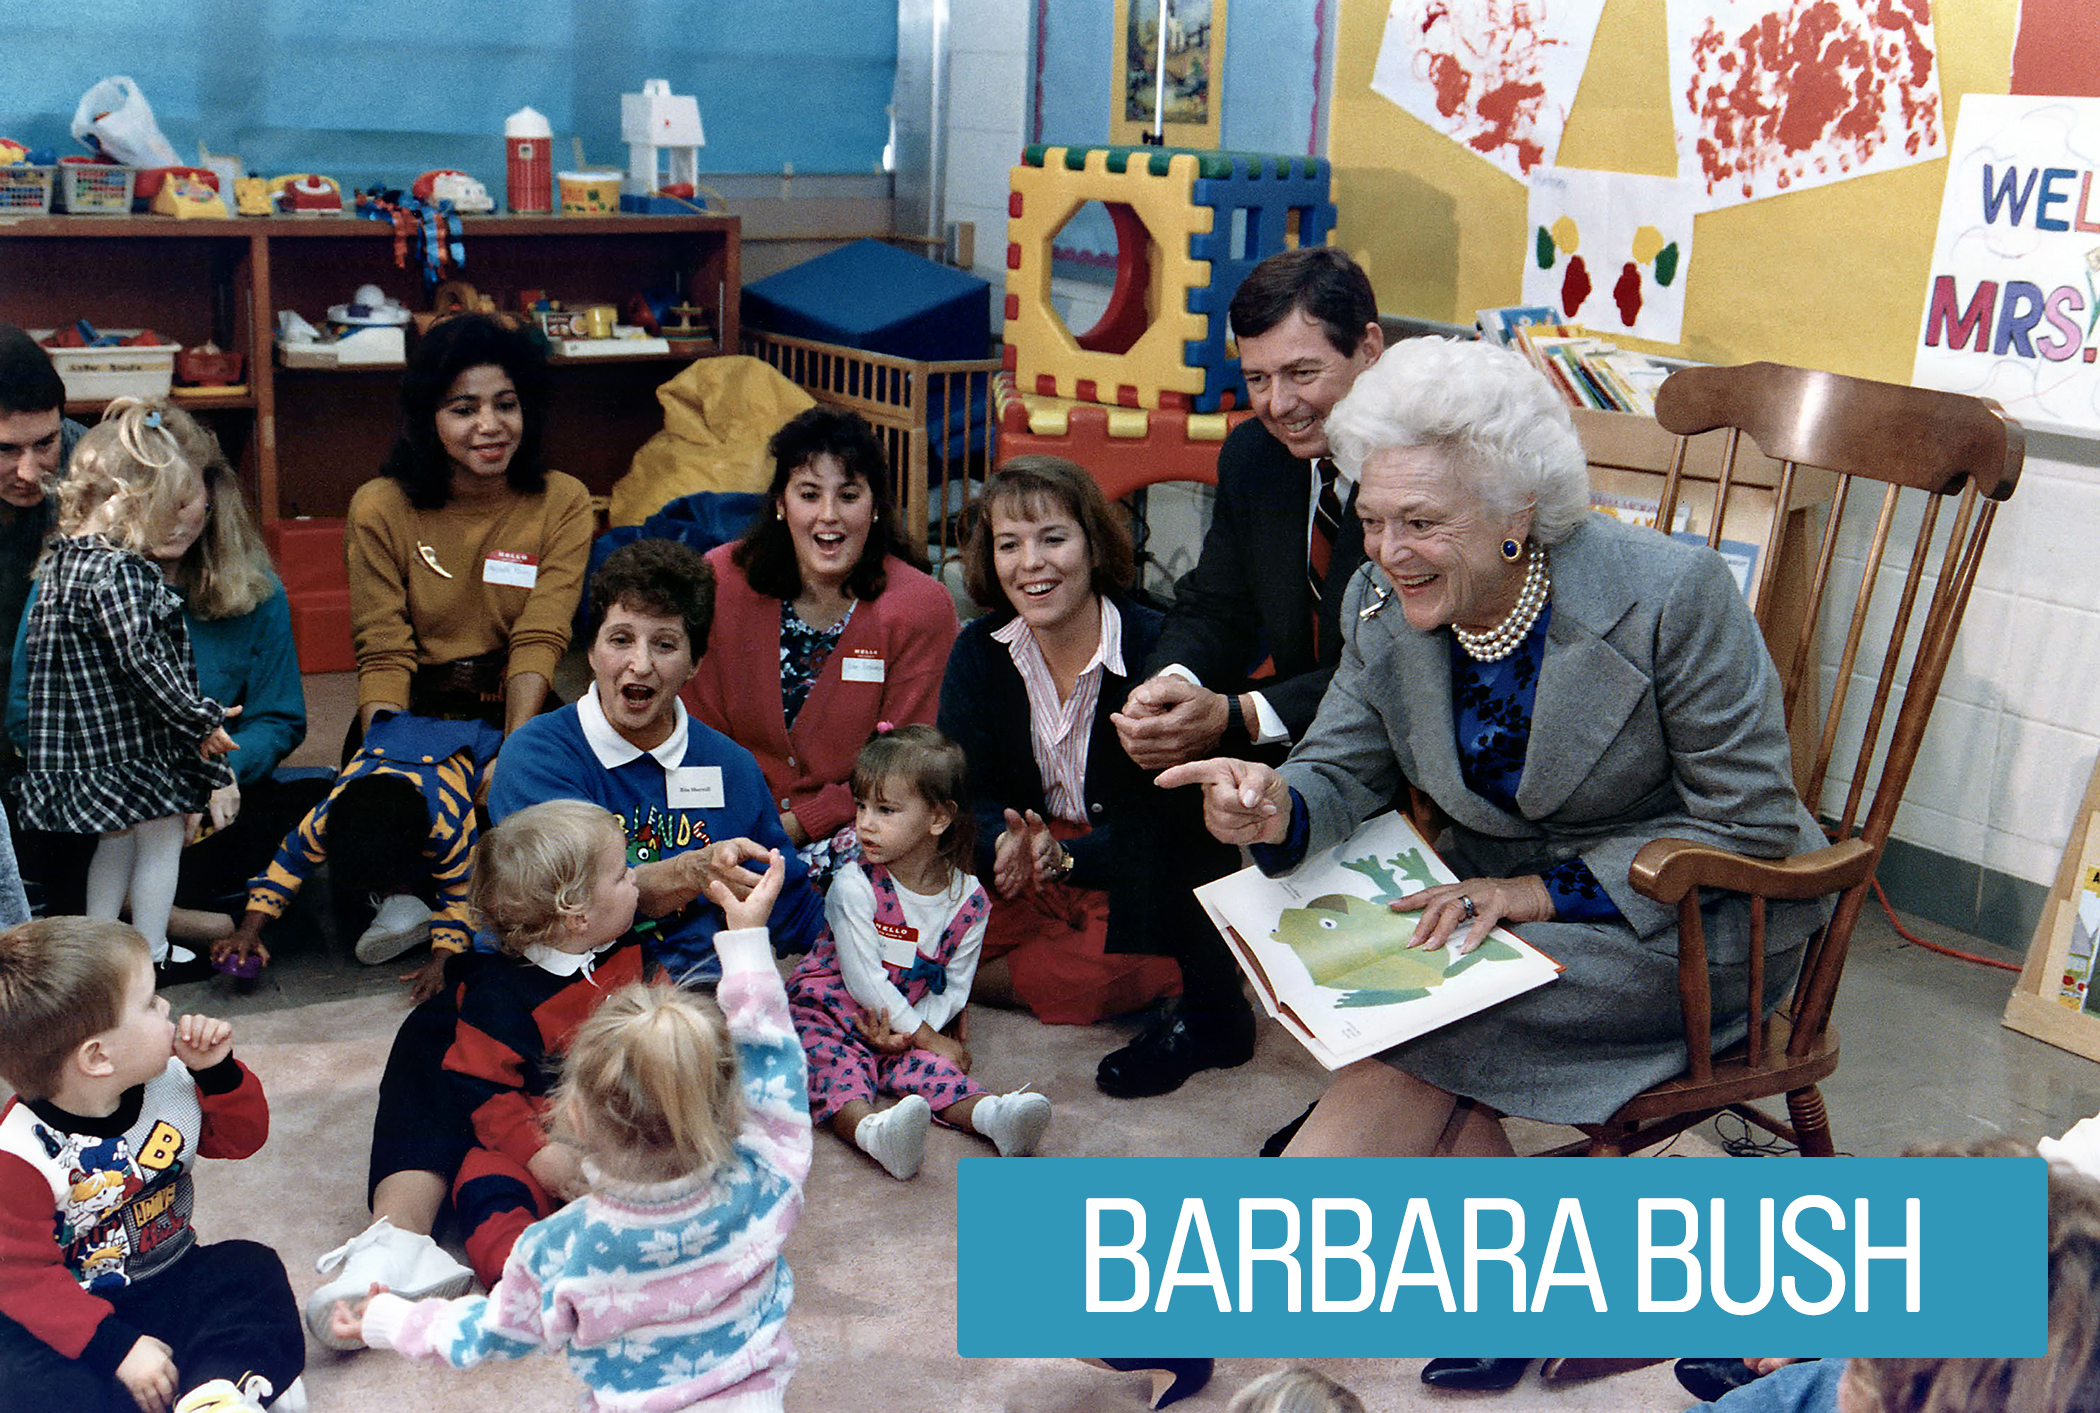 First Lady Barbara Bush sought to reduce illiteracy in America. She tapped a wide network and established her own grant-soliciting foundation to fund literary programs.  She saw problems like unemployment, homelessness and crime as being rooted in illiteracy. She even started her own radio story time for kids.